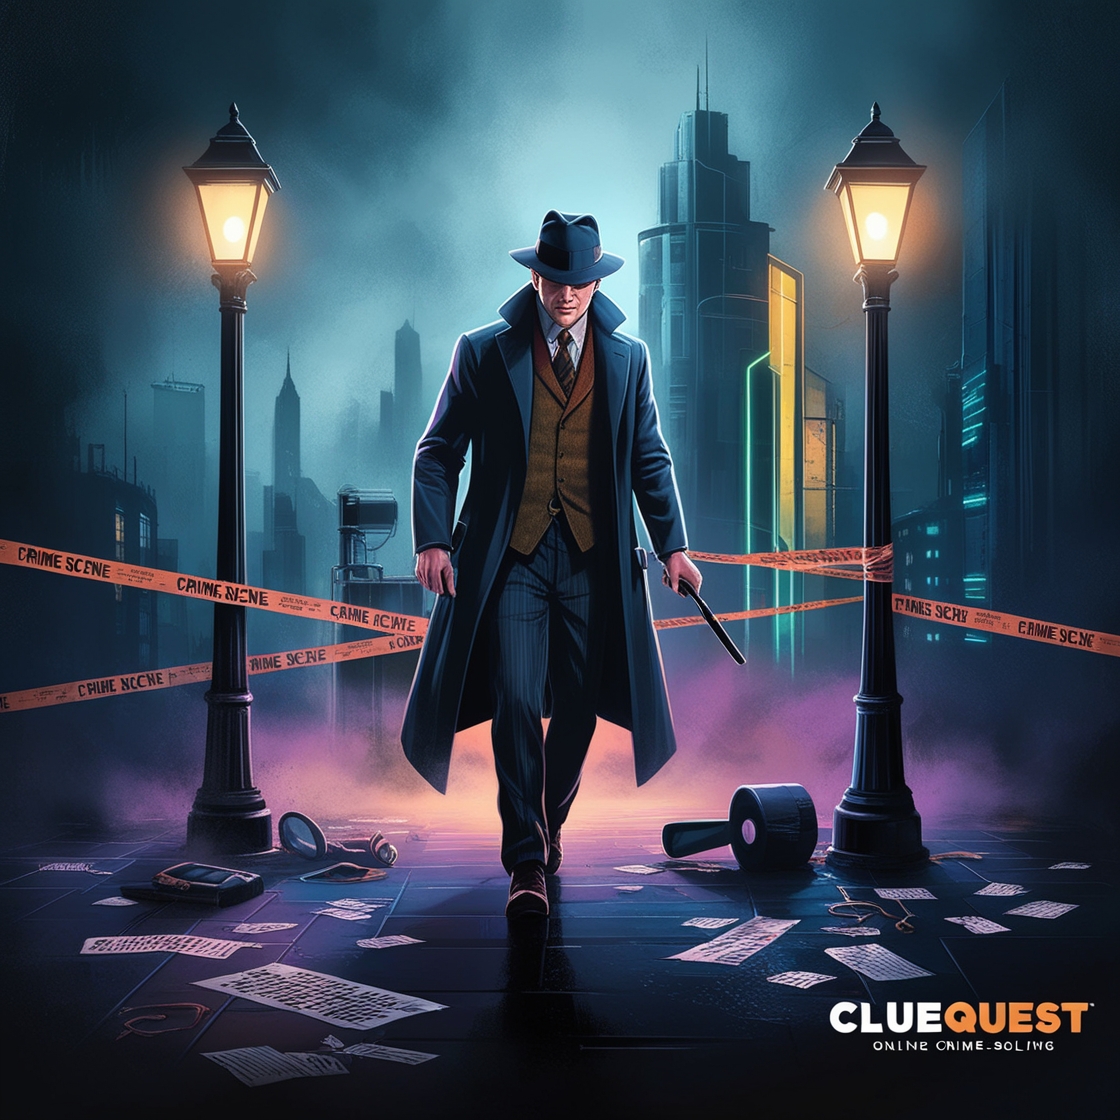                        Cluequest-free online mystery game